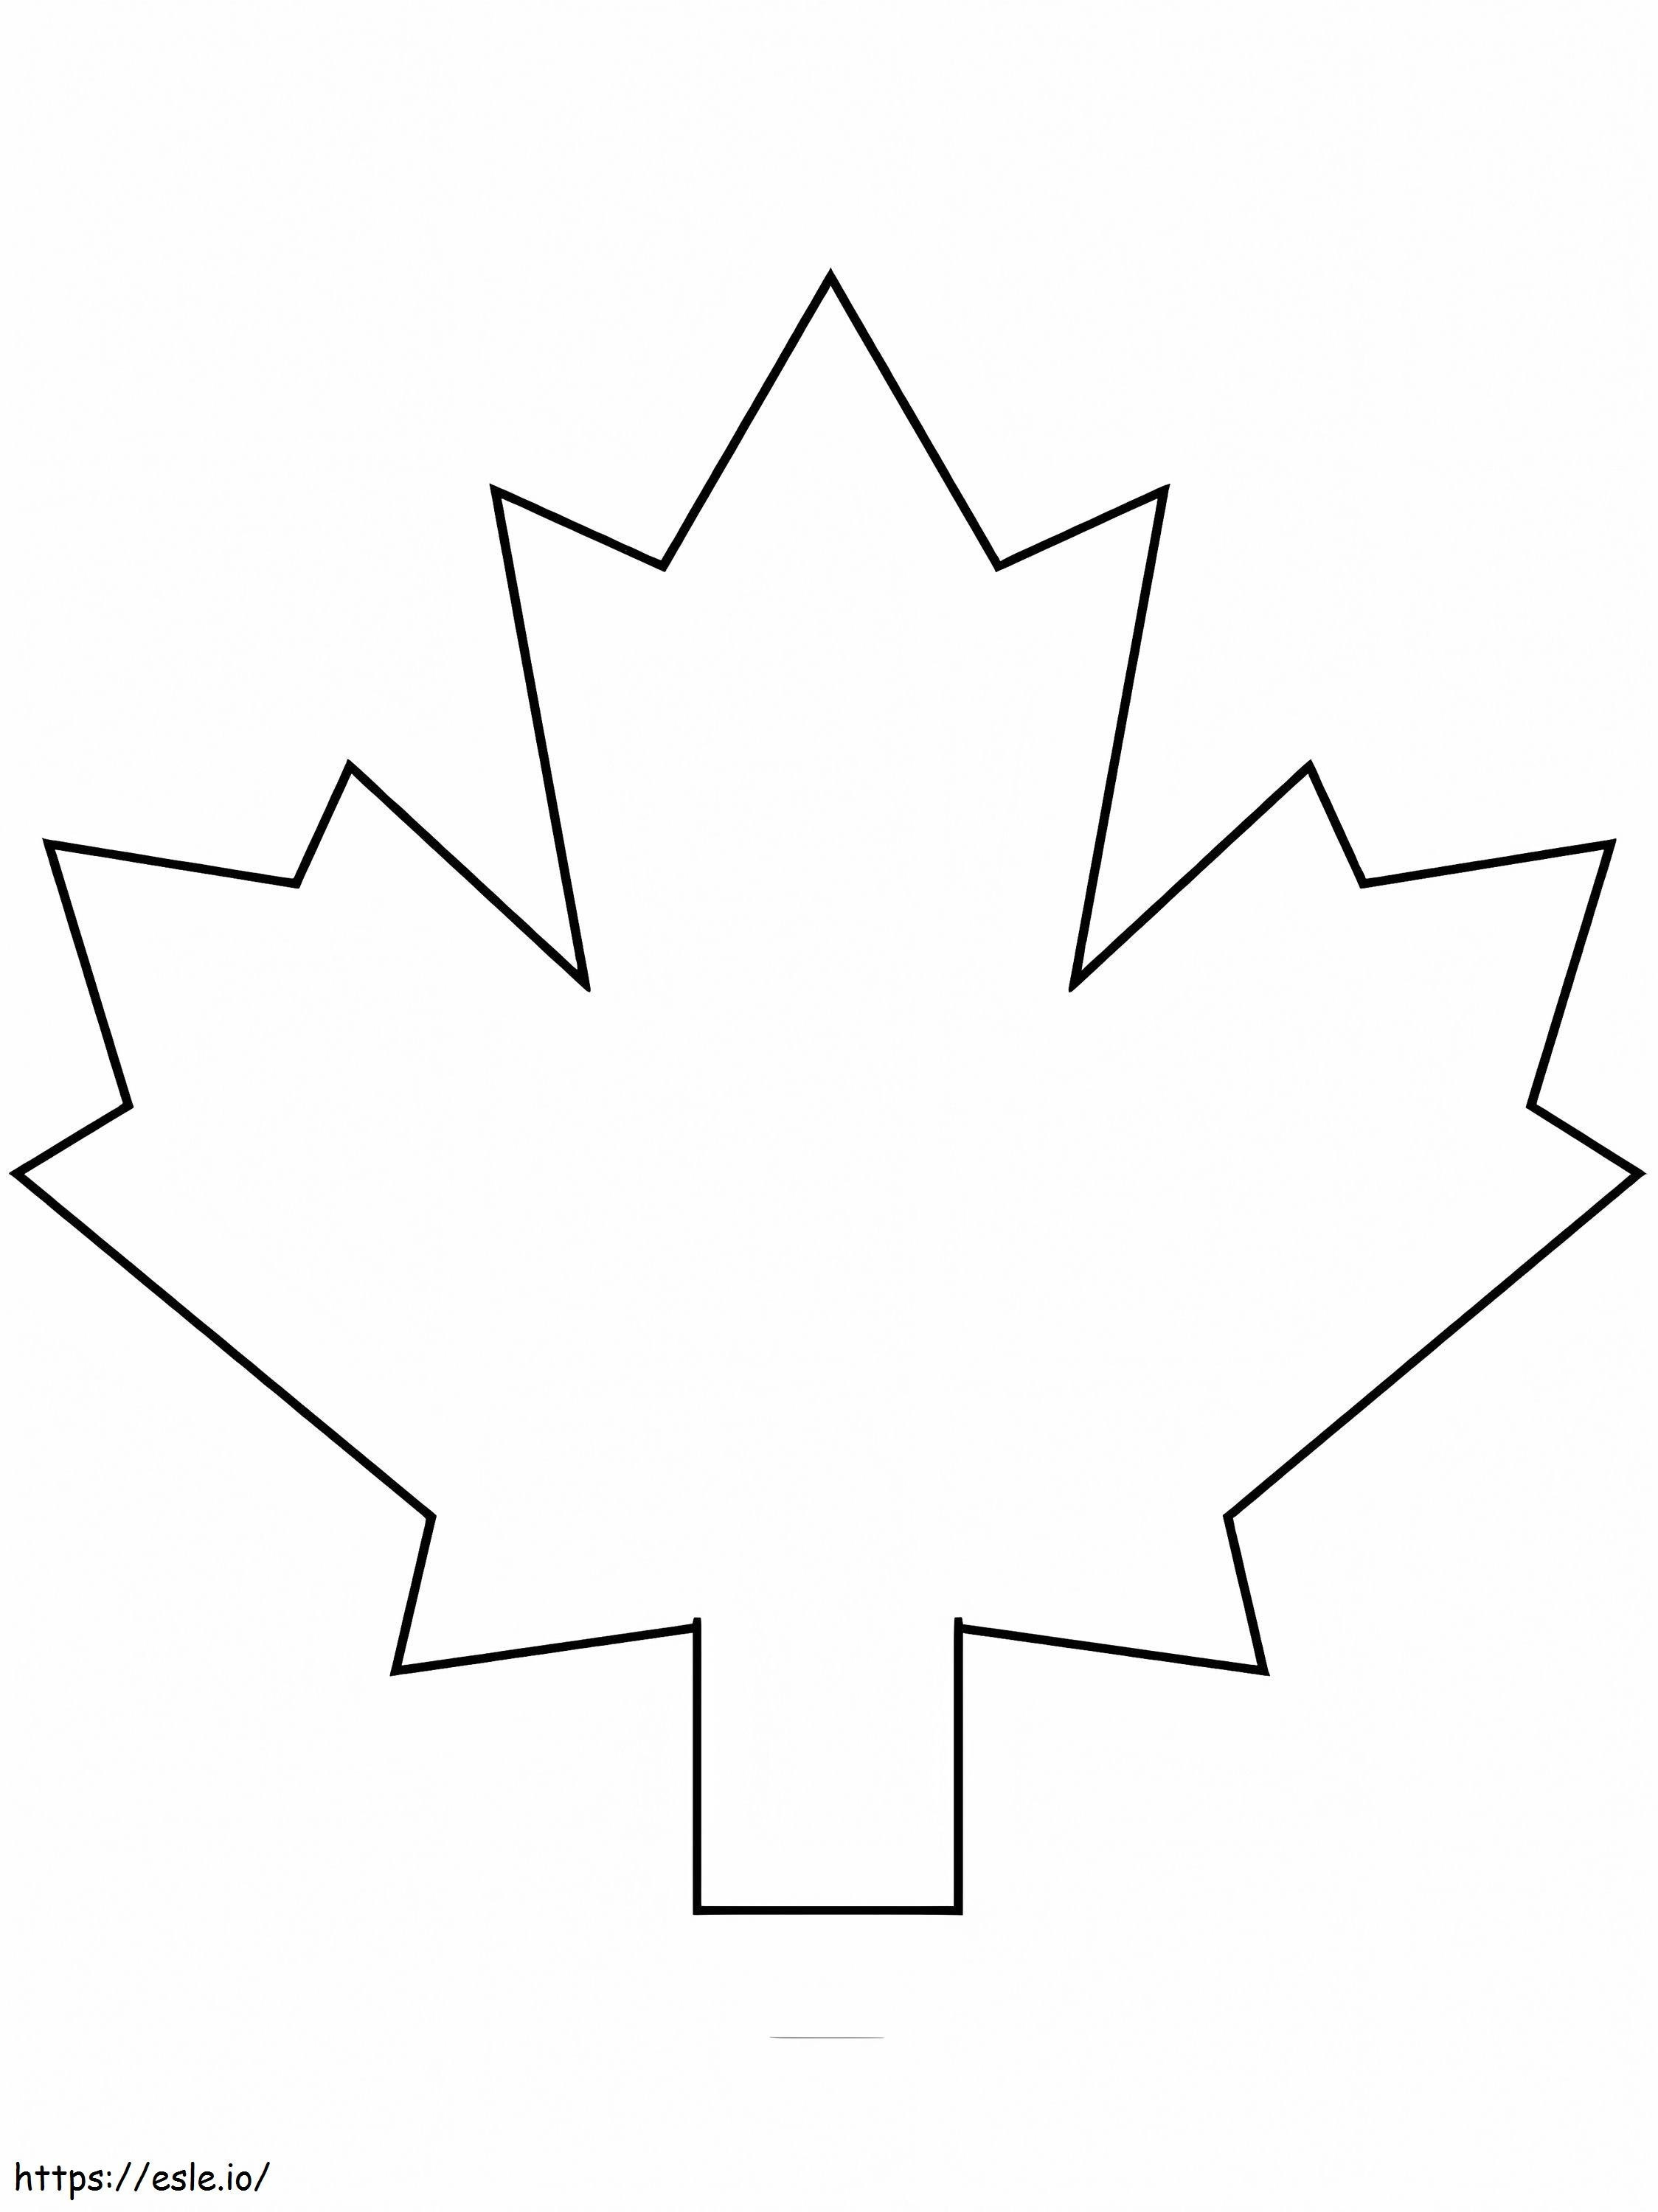 Maple Leaf 1 coloring page